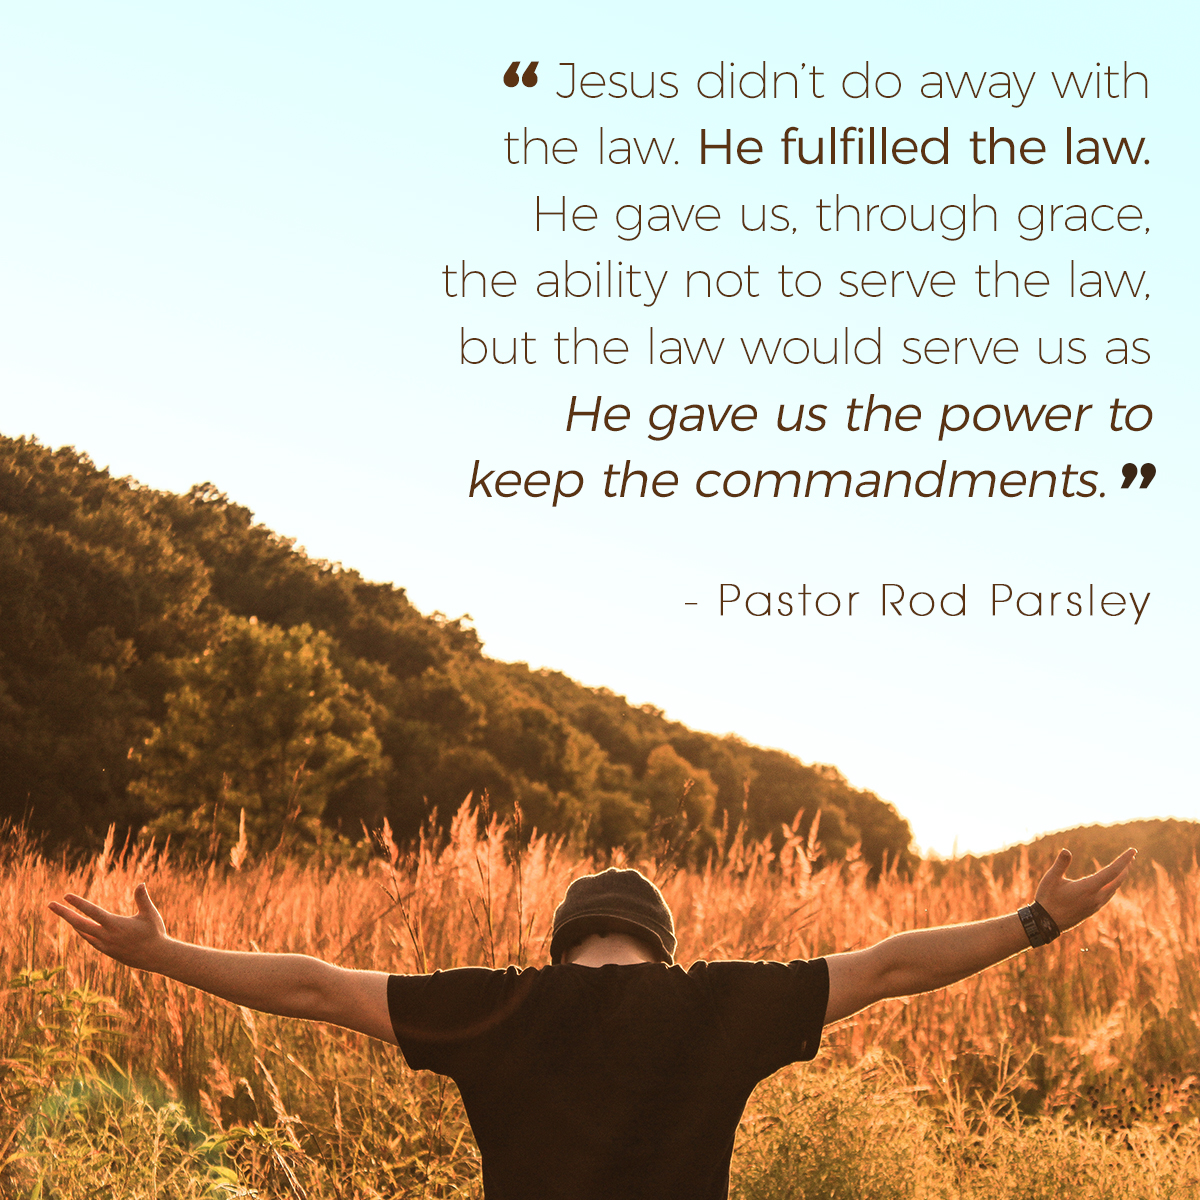 “Jesus didn’t do away with the law. He fulfilled the law. He gave us, through grace, the ability not to serve the law, but the law would serve us as He gave us the power to keep the commandments.” – Pastor Rod Parsley